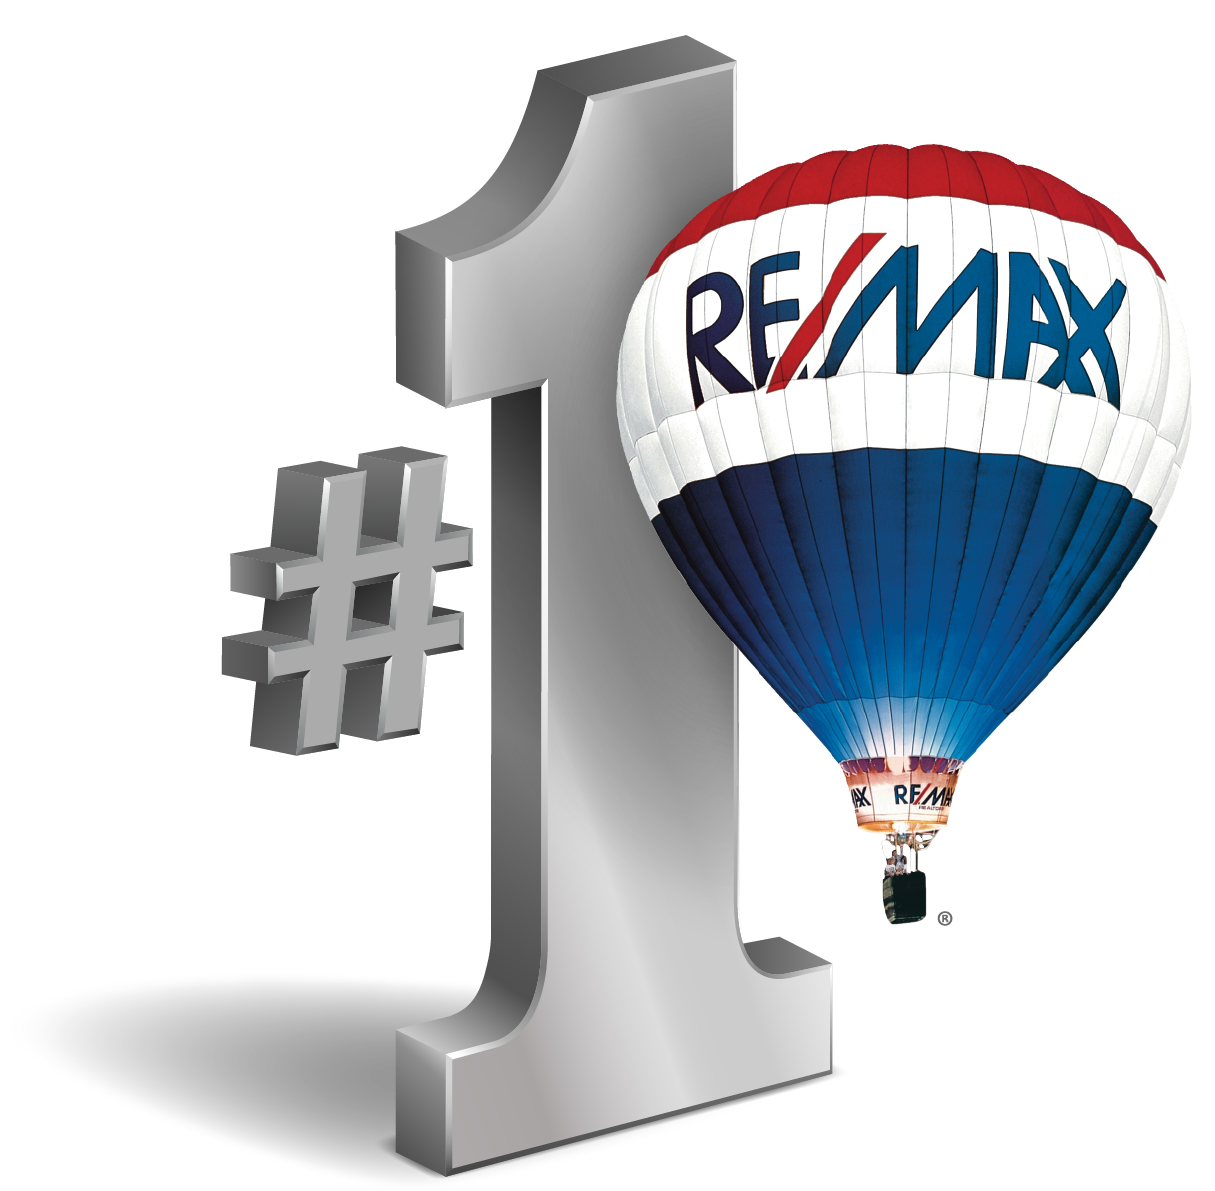 RE/MAX is #1!